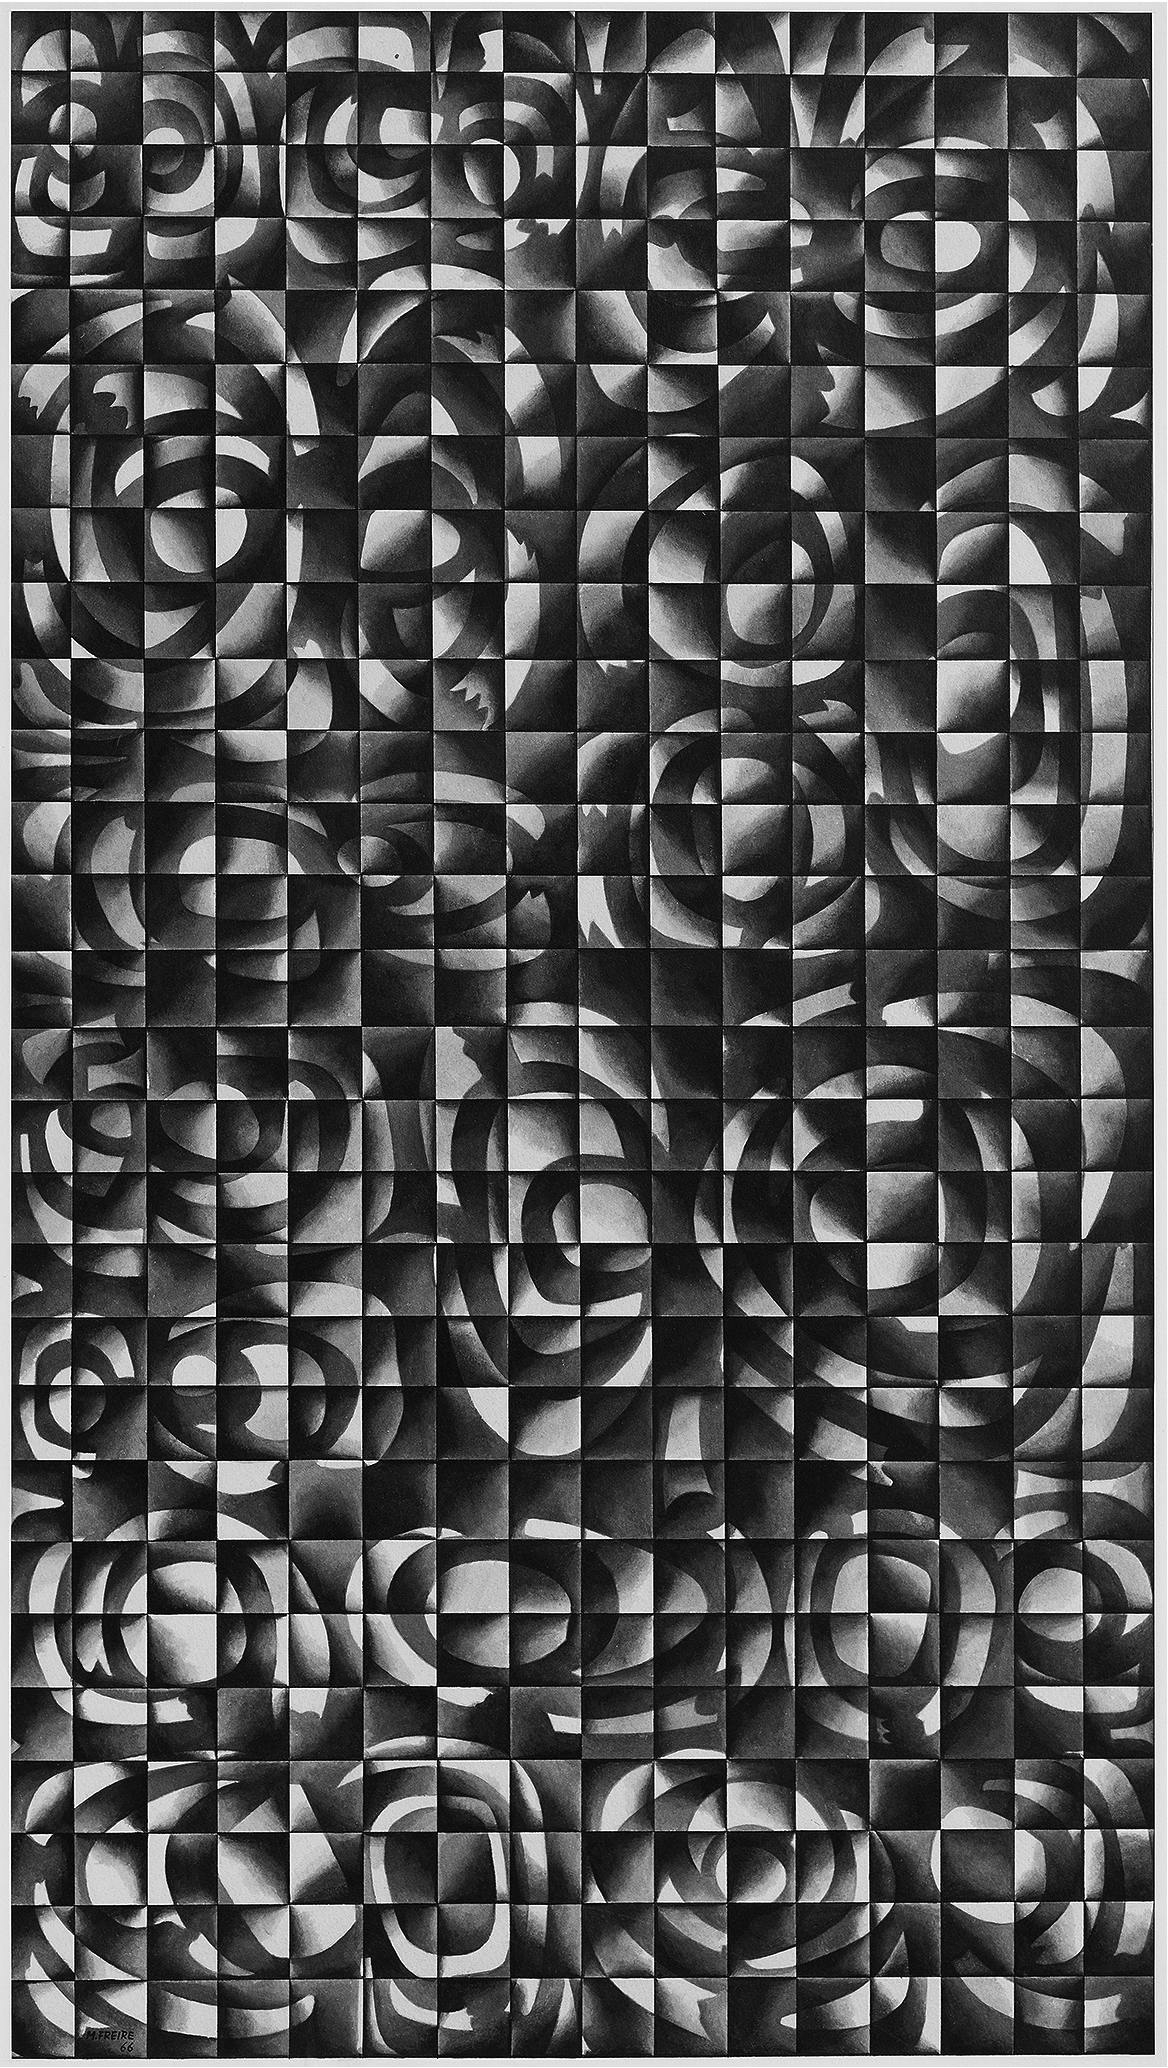 A grayscale painting of abstract, circular forms in a grid.